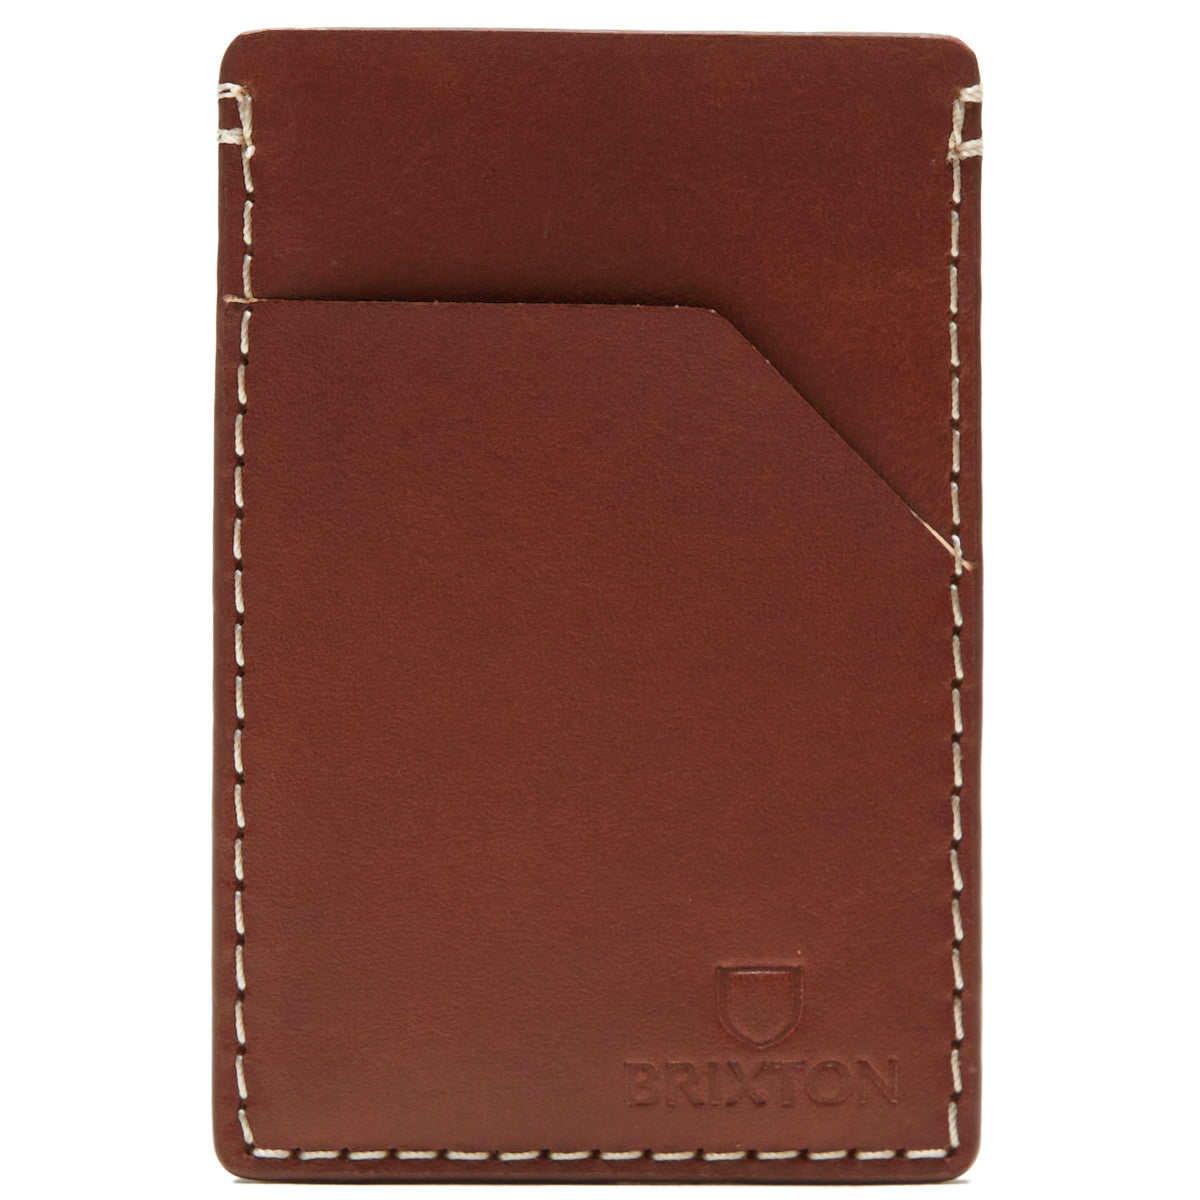 Brixton Traditional Card Holder Wallet - Brown image 1